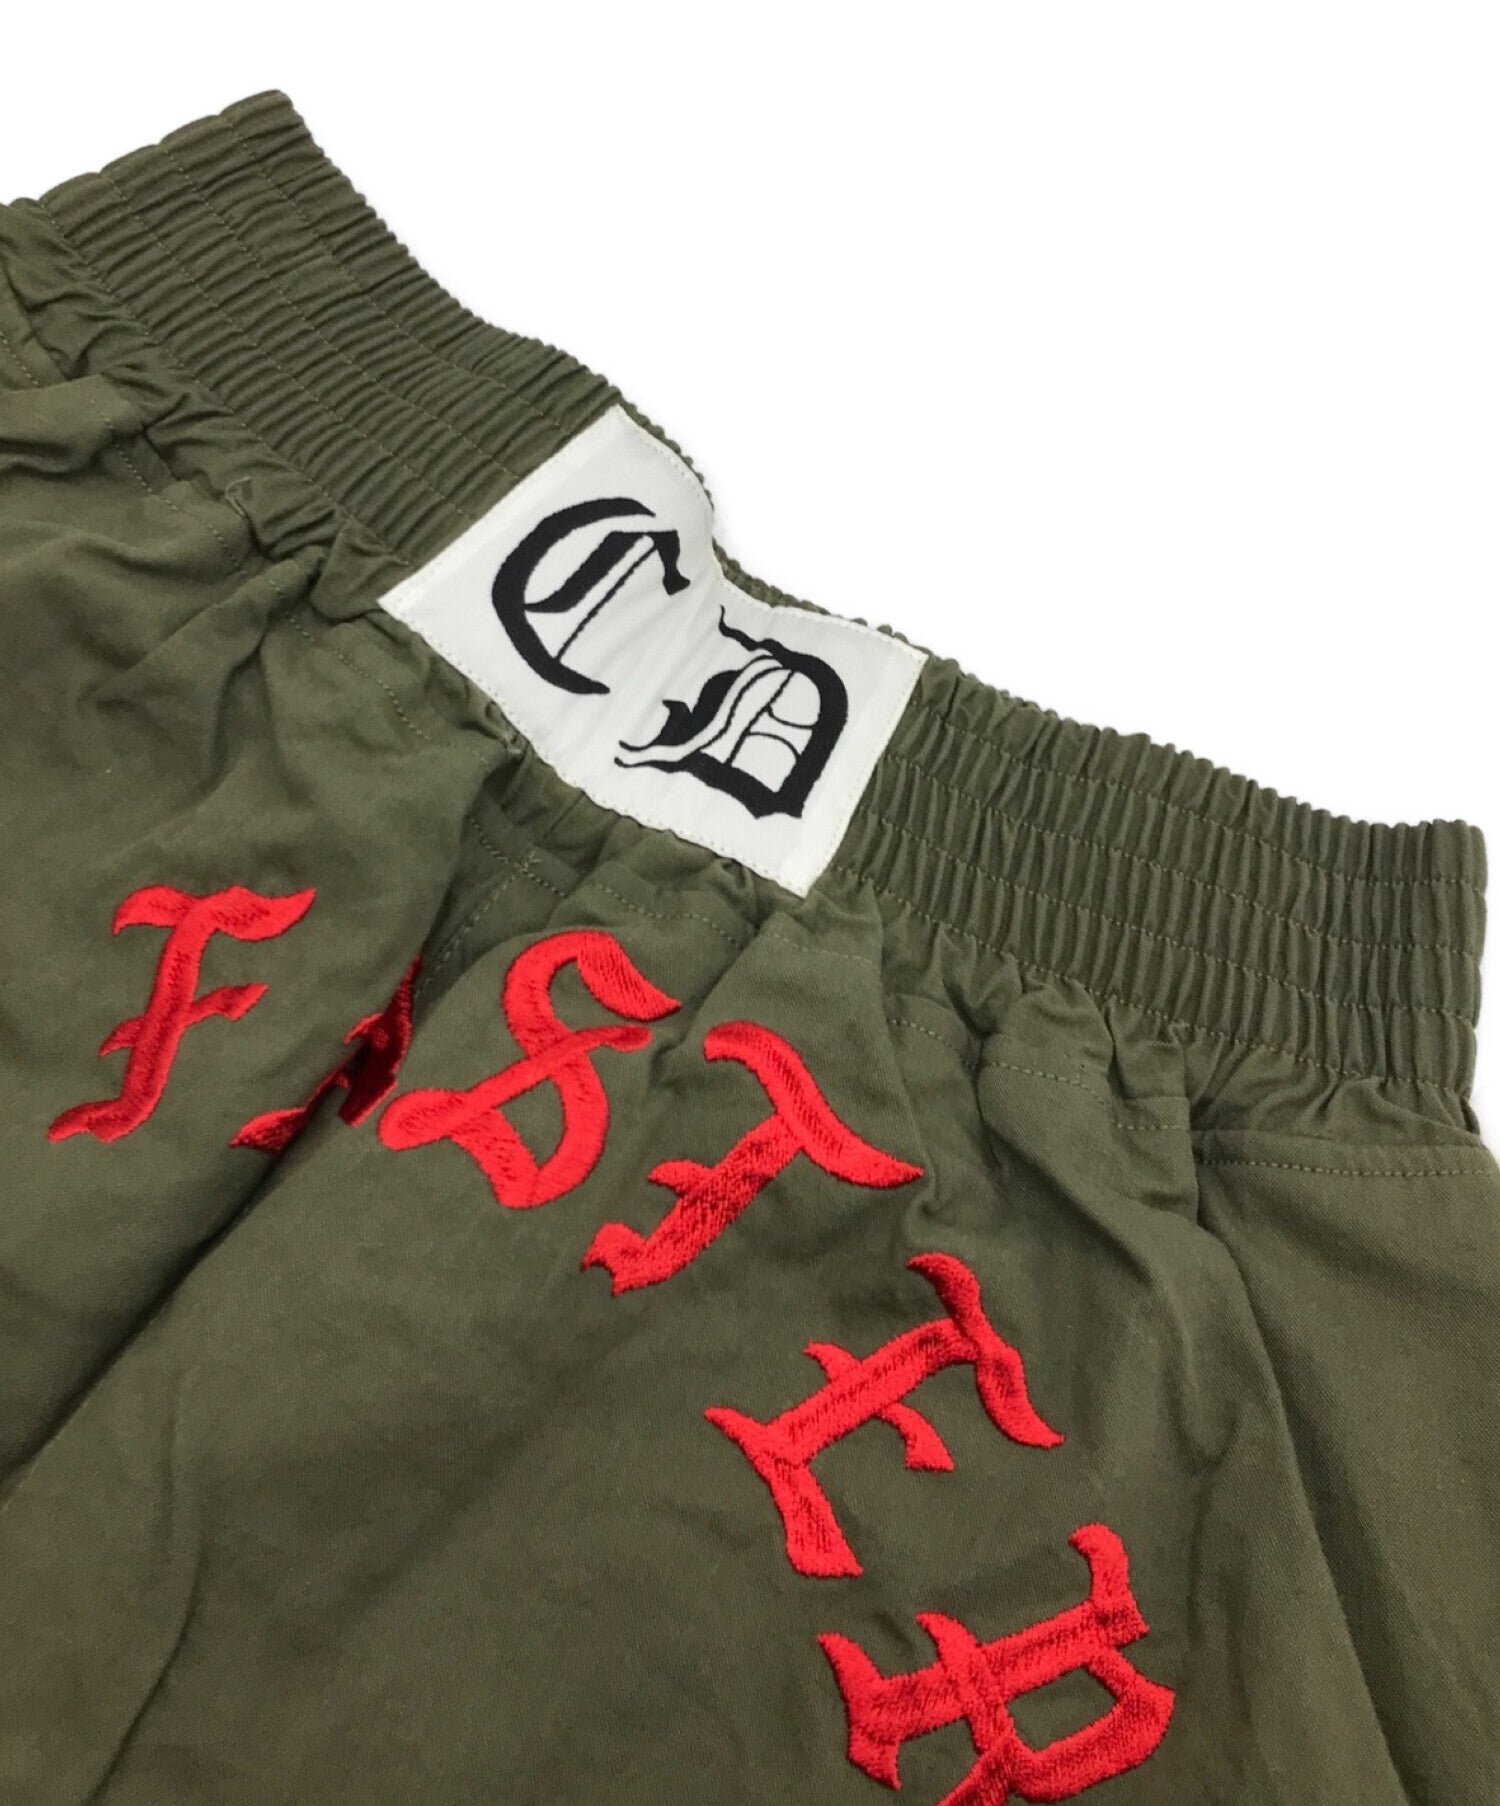 READYMADE BOXING SHORTS RE-CO-KH-00-00-87 | Archive Factory